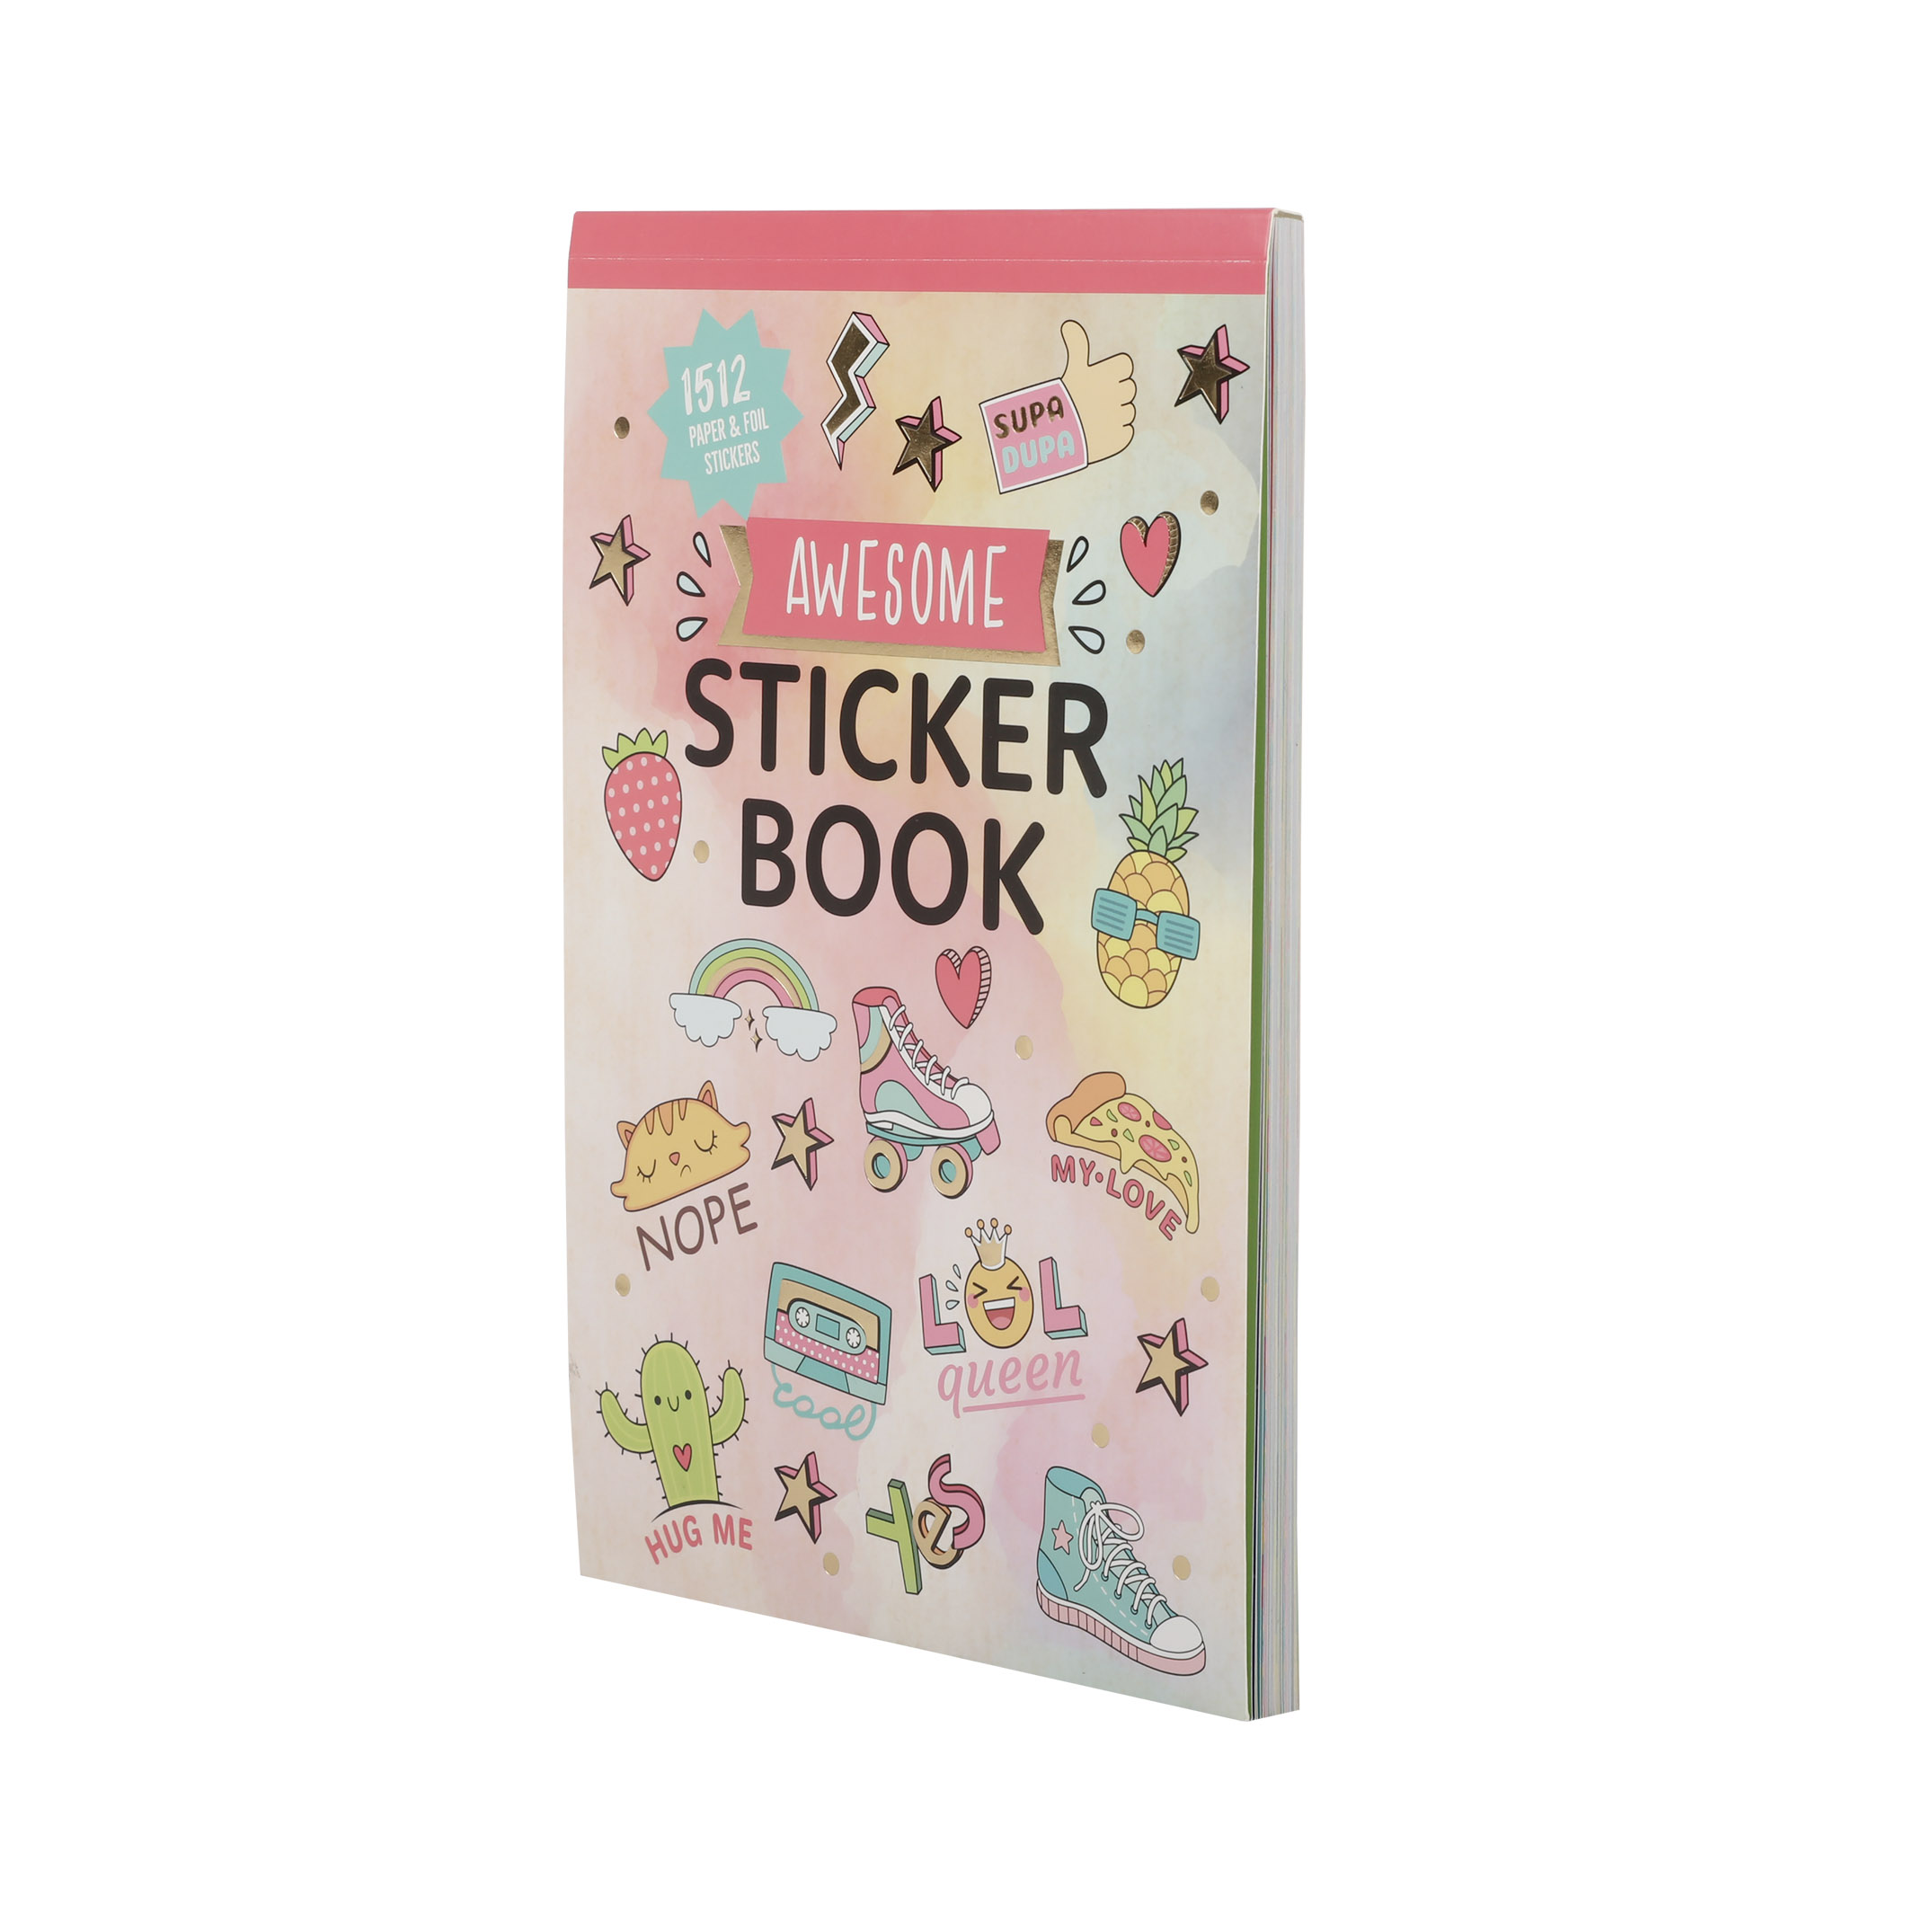 Pen+Gear Awesome Sticker Book, 40 Pages, 2500+ Paper and Foil Stickers